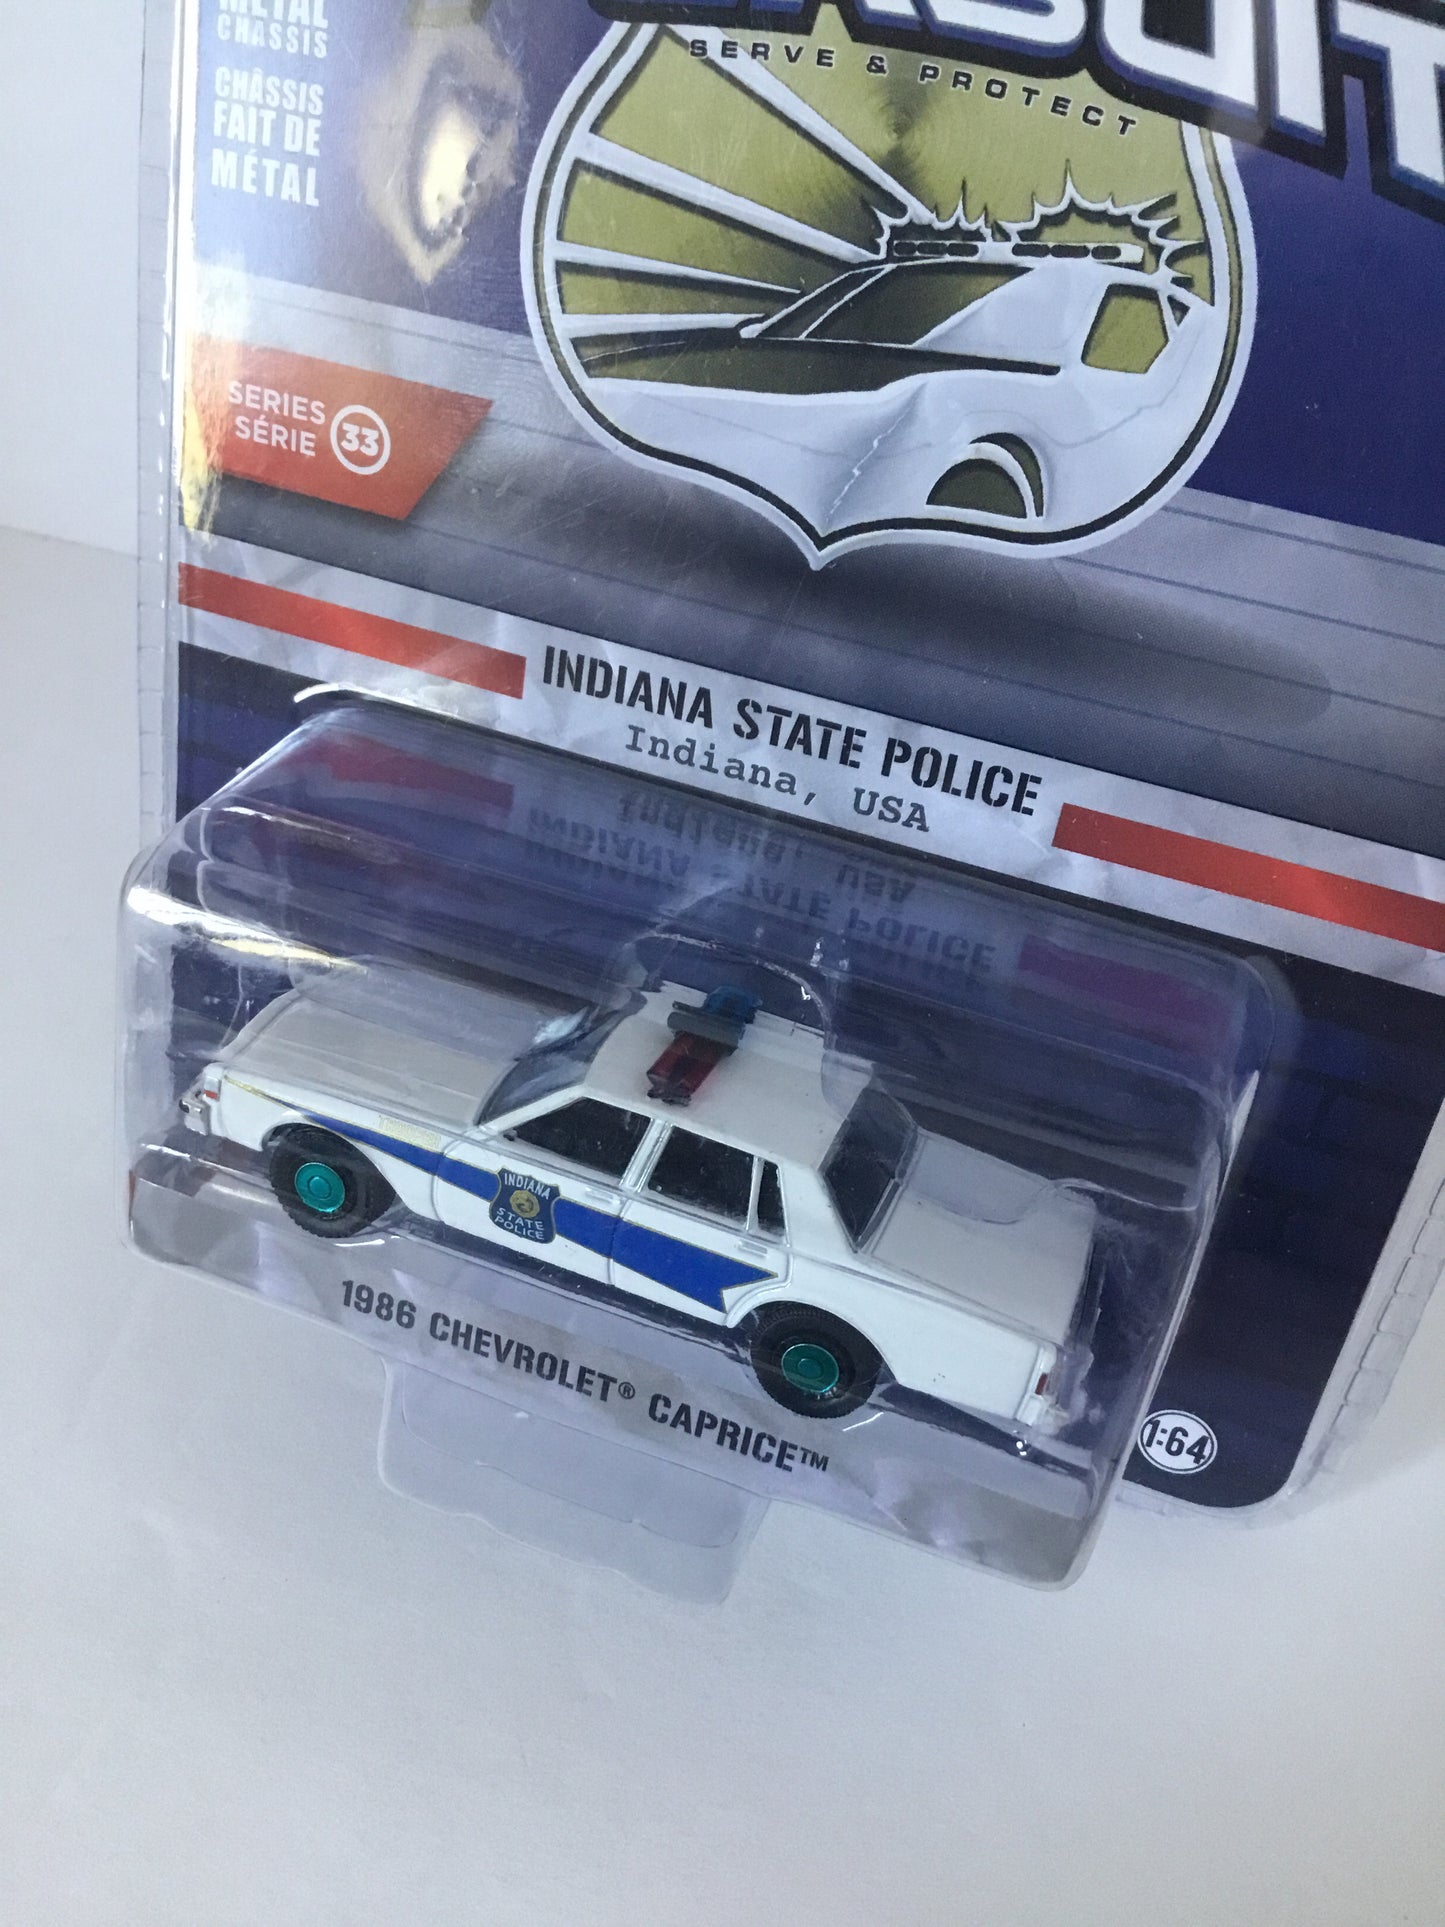 Greenlight Hot Pursuit series 33 Indiana state police 1986 Chevrolet Caprice CHASE